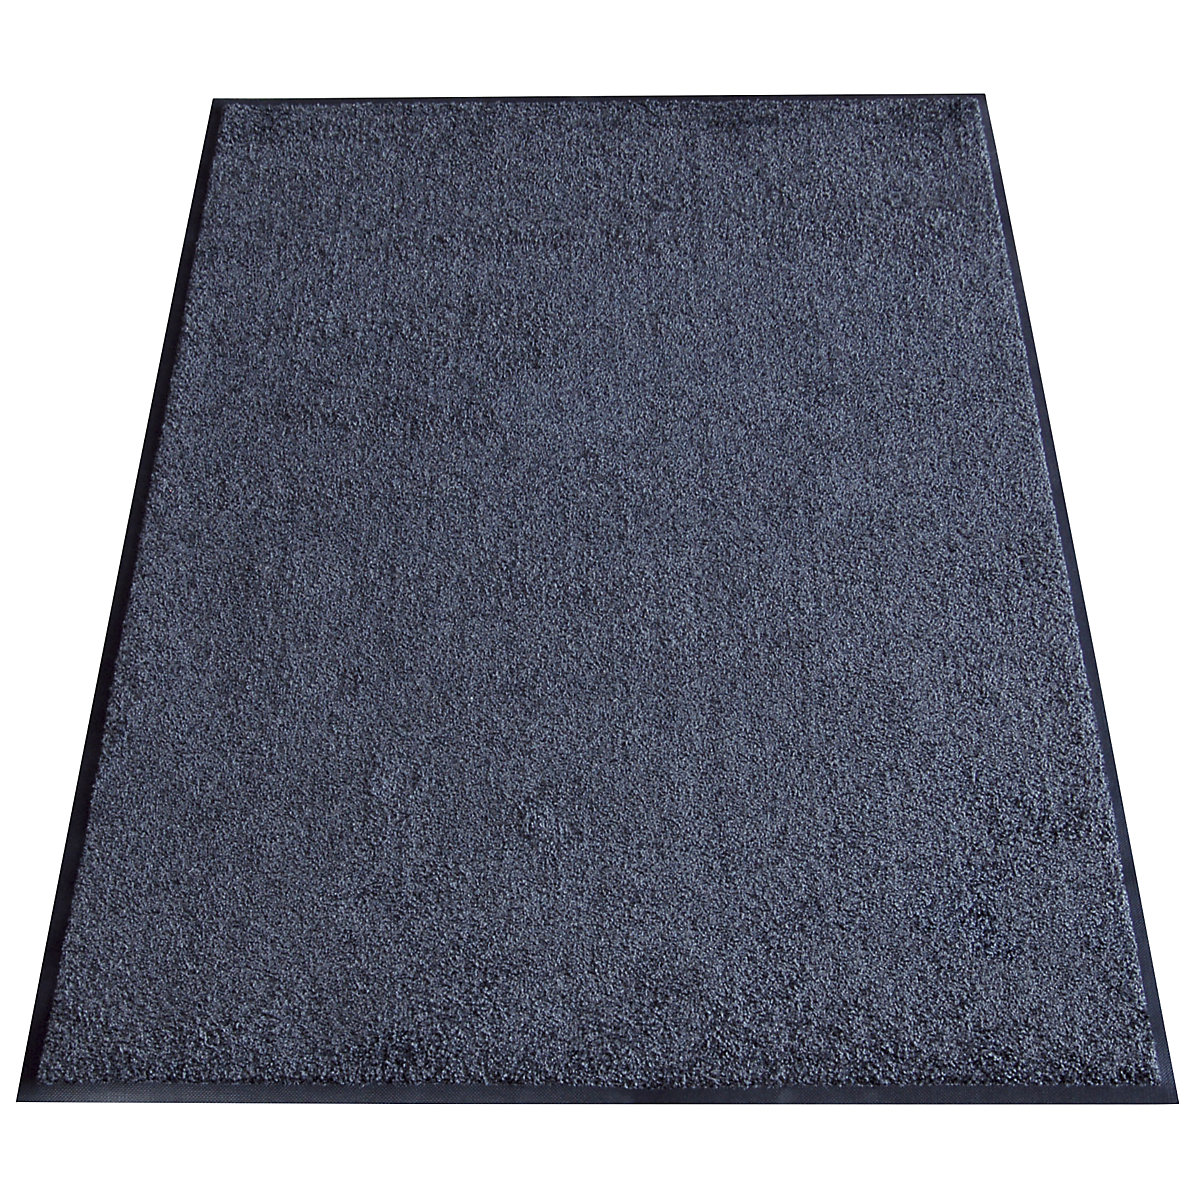 EAZYCARE WASH entrance matting, LxW 1800 x 1150 mm, charcoal